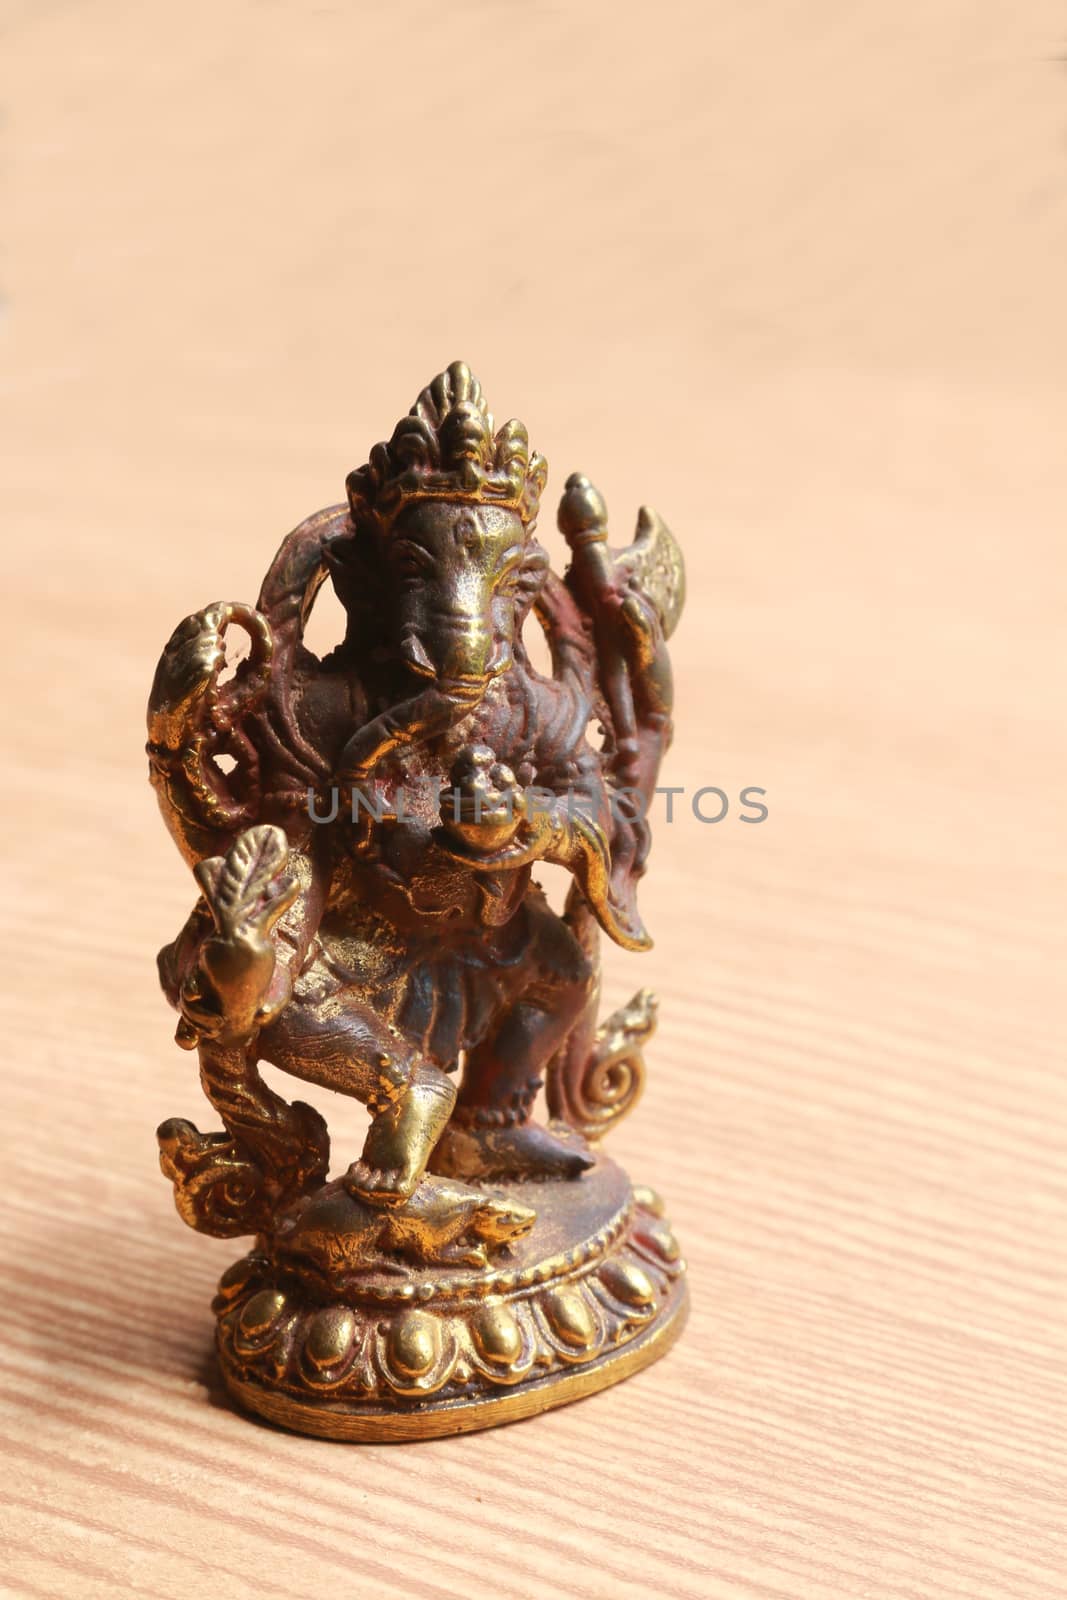 the sculpture of Ganesha made from steel myeik.Ganesha is the symbol of successful and the god of art.